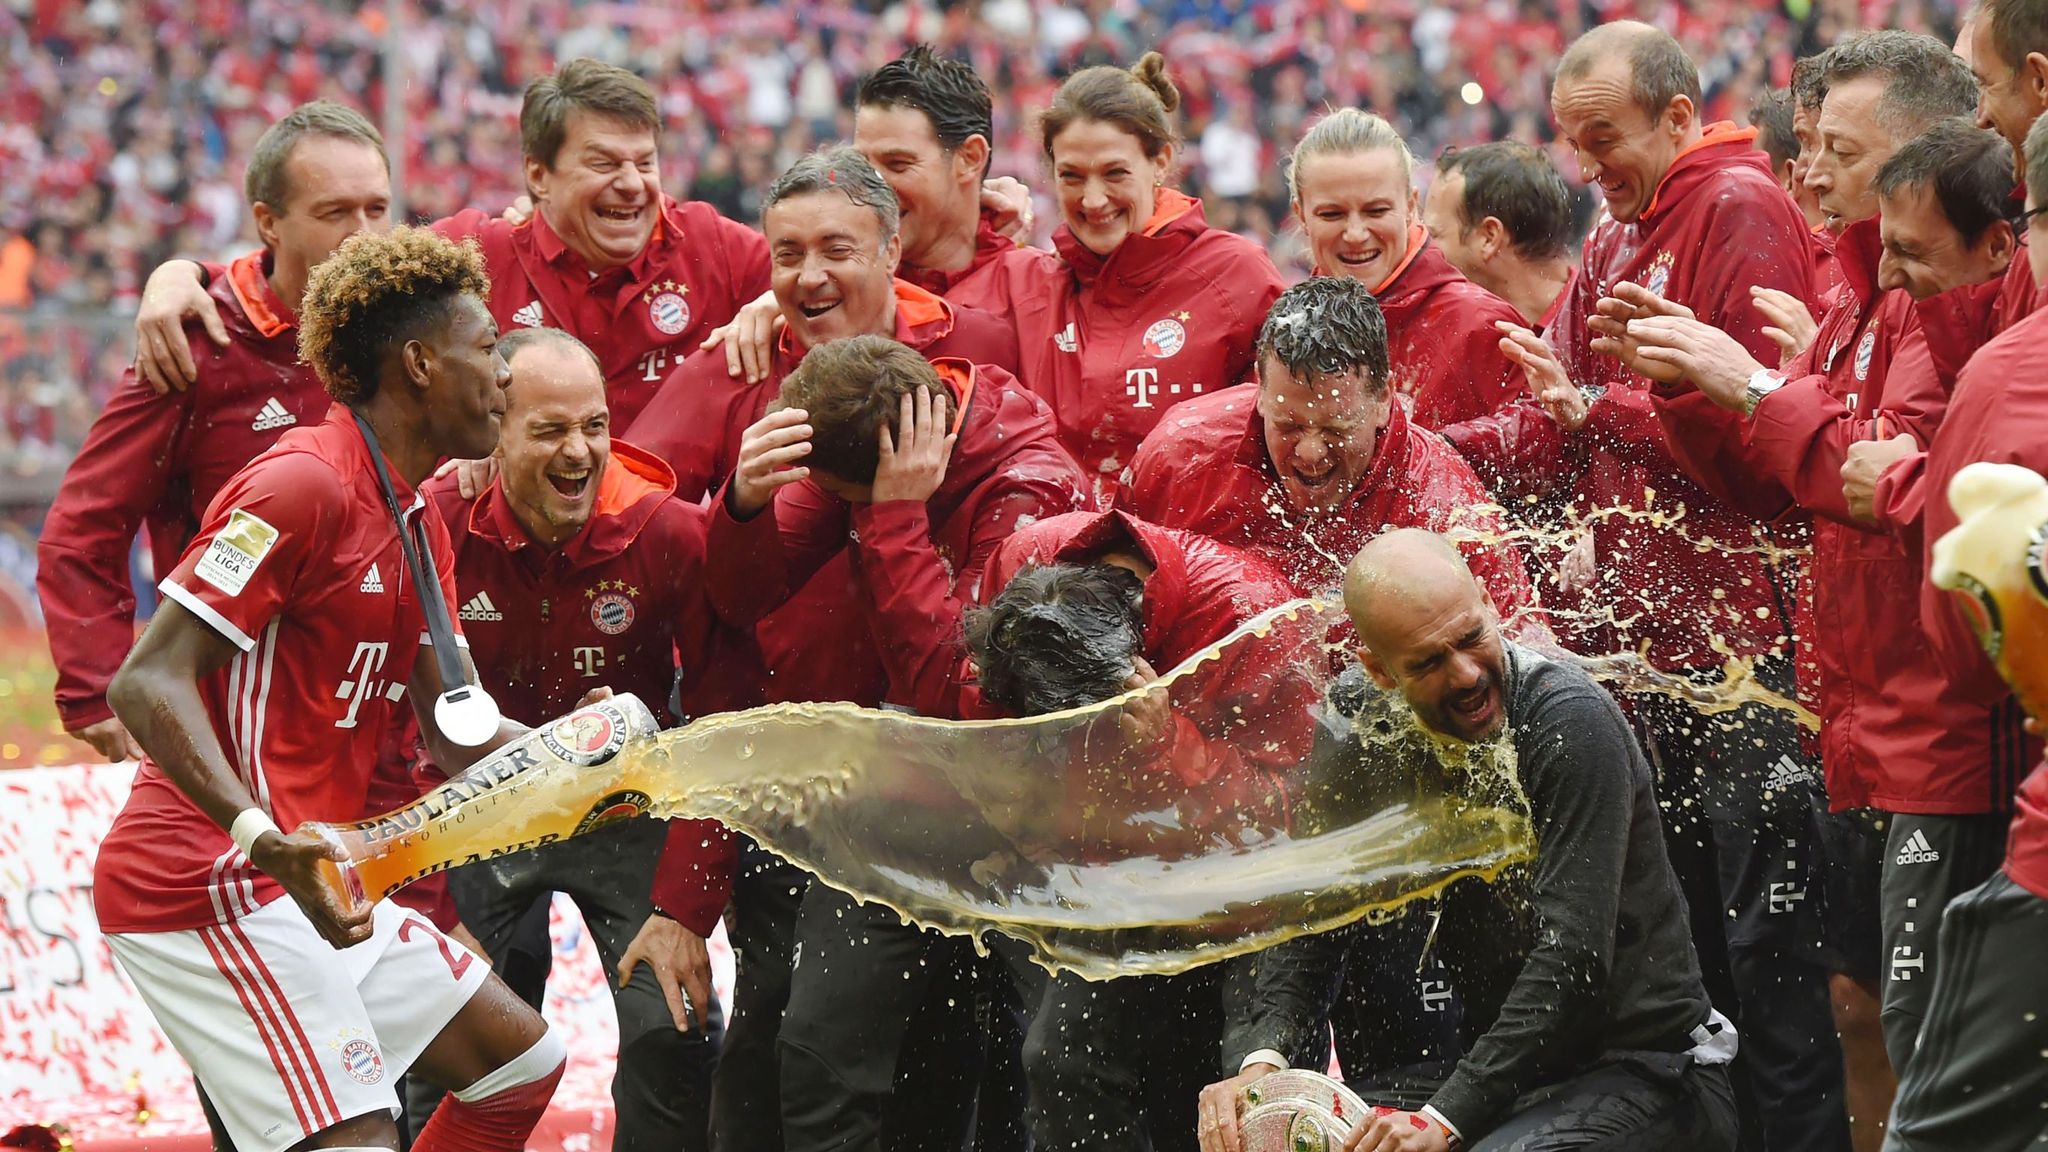 Pep soaked in beer as Munich third straight Bundesliga title win | News | Sky Sports